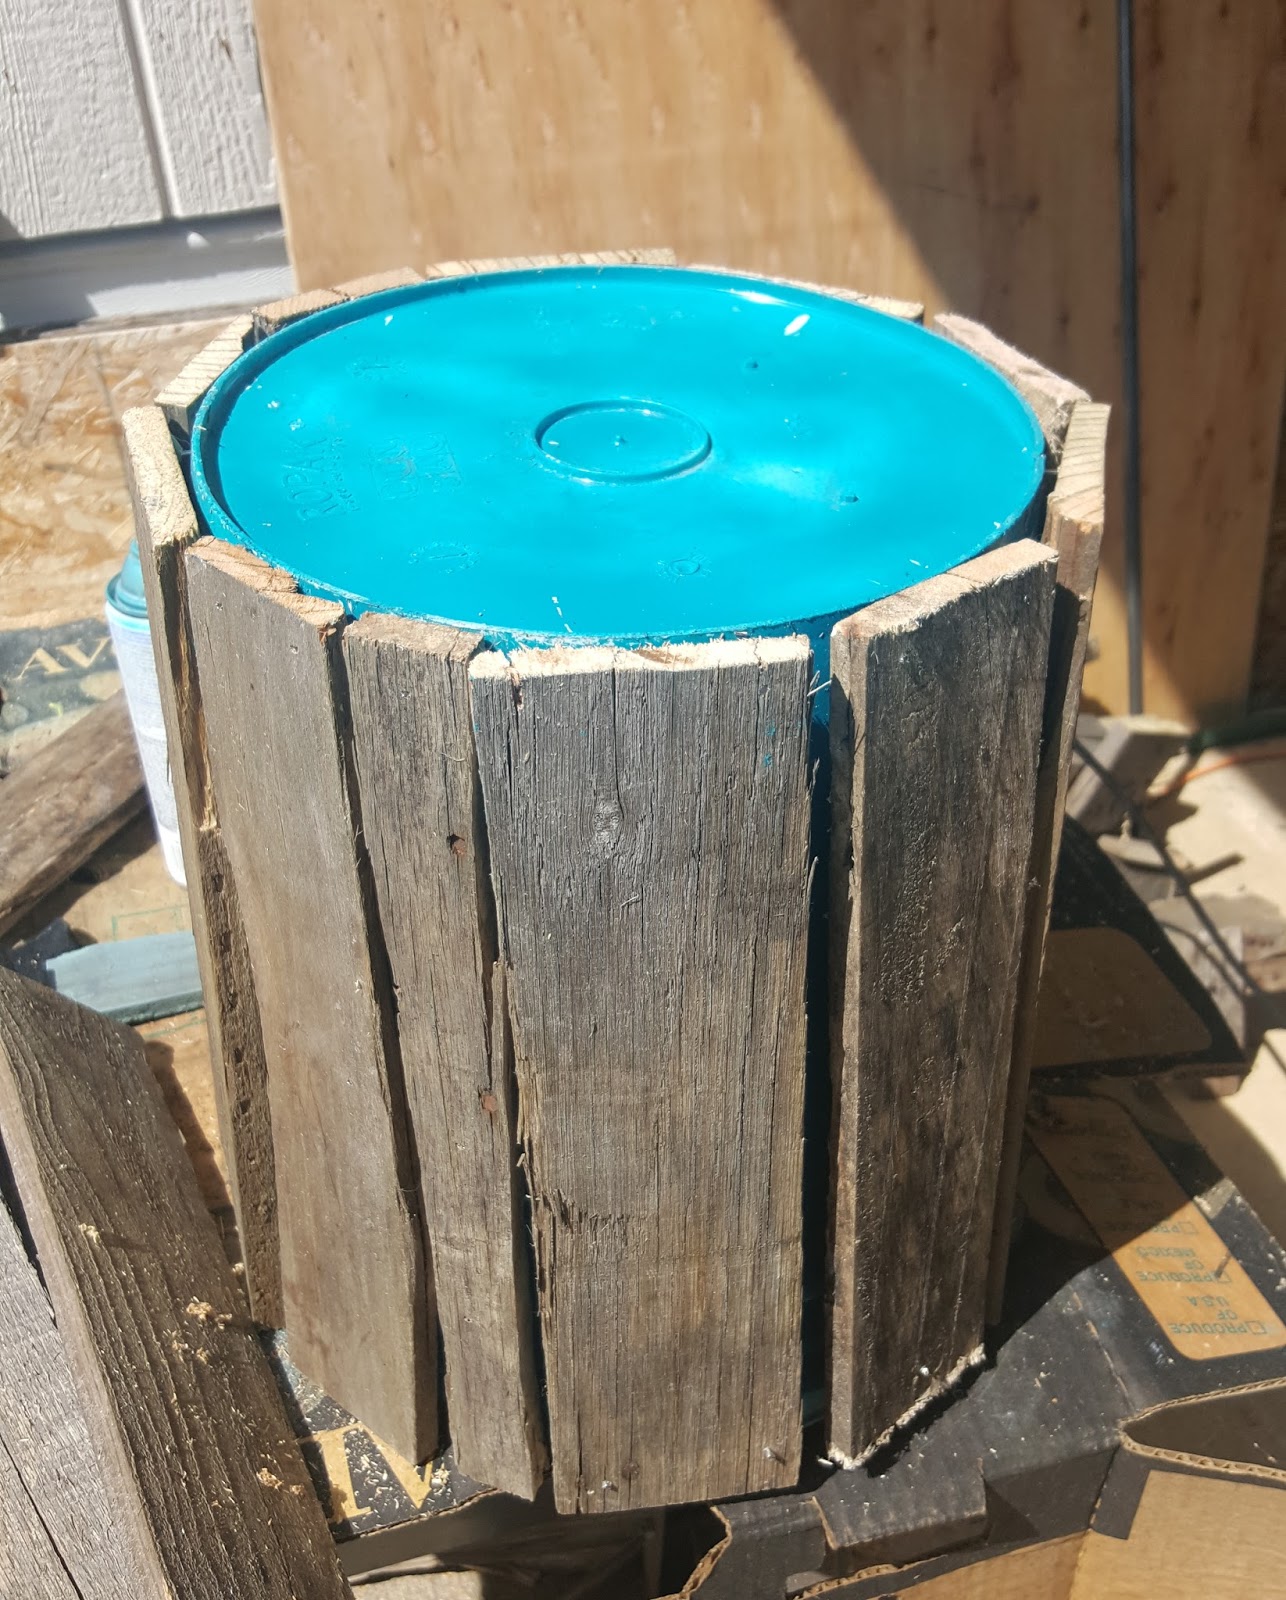 Make The Best of Things: Five Gallon Blingy Bucket Table DIY